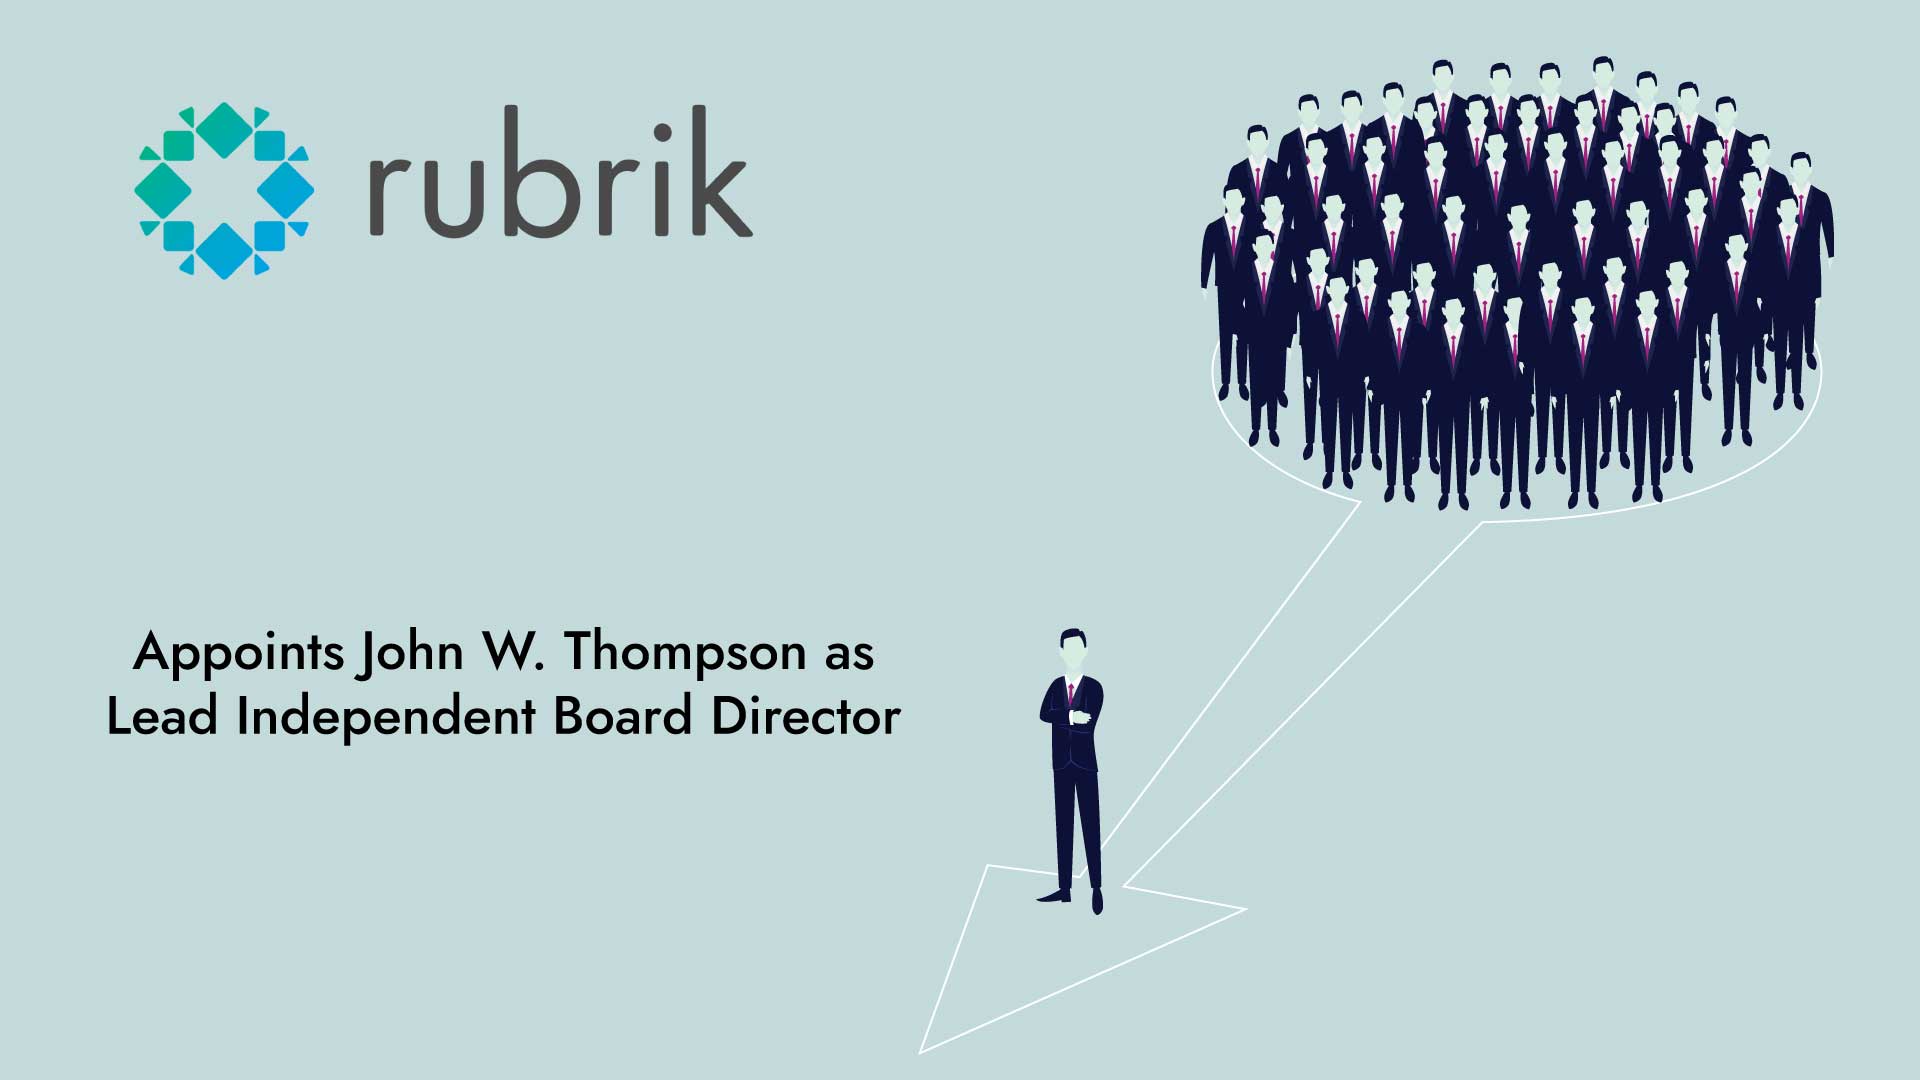 Rubrik Appoints John W. Thompson as the Lead Independent Board Director